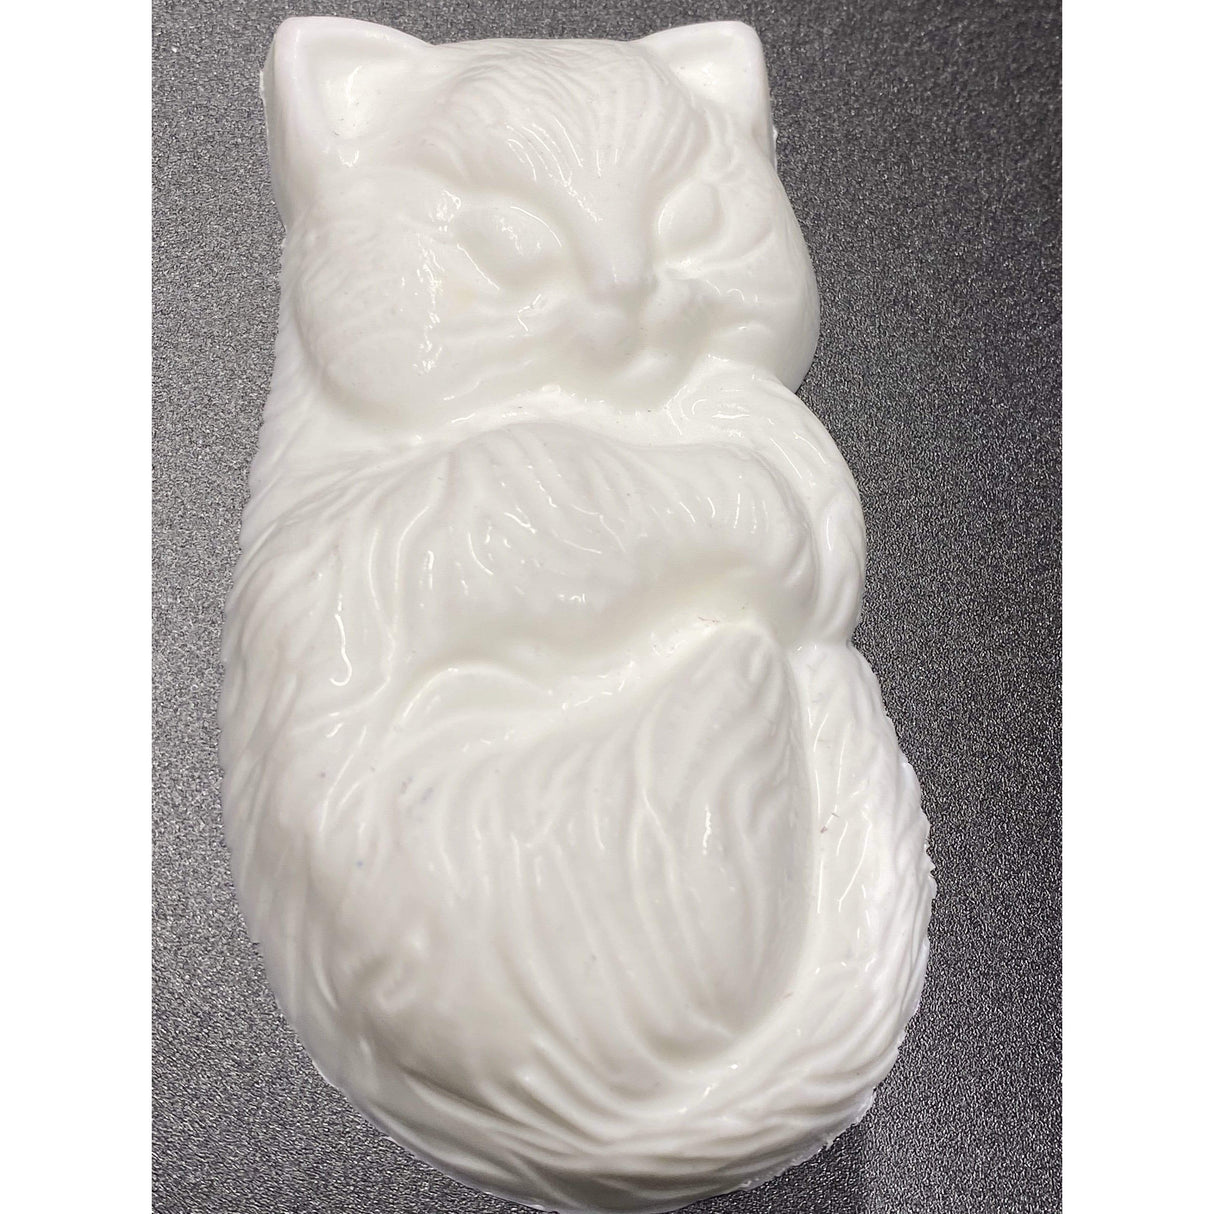 Curled up Kitty Plastic Hand Mold